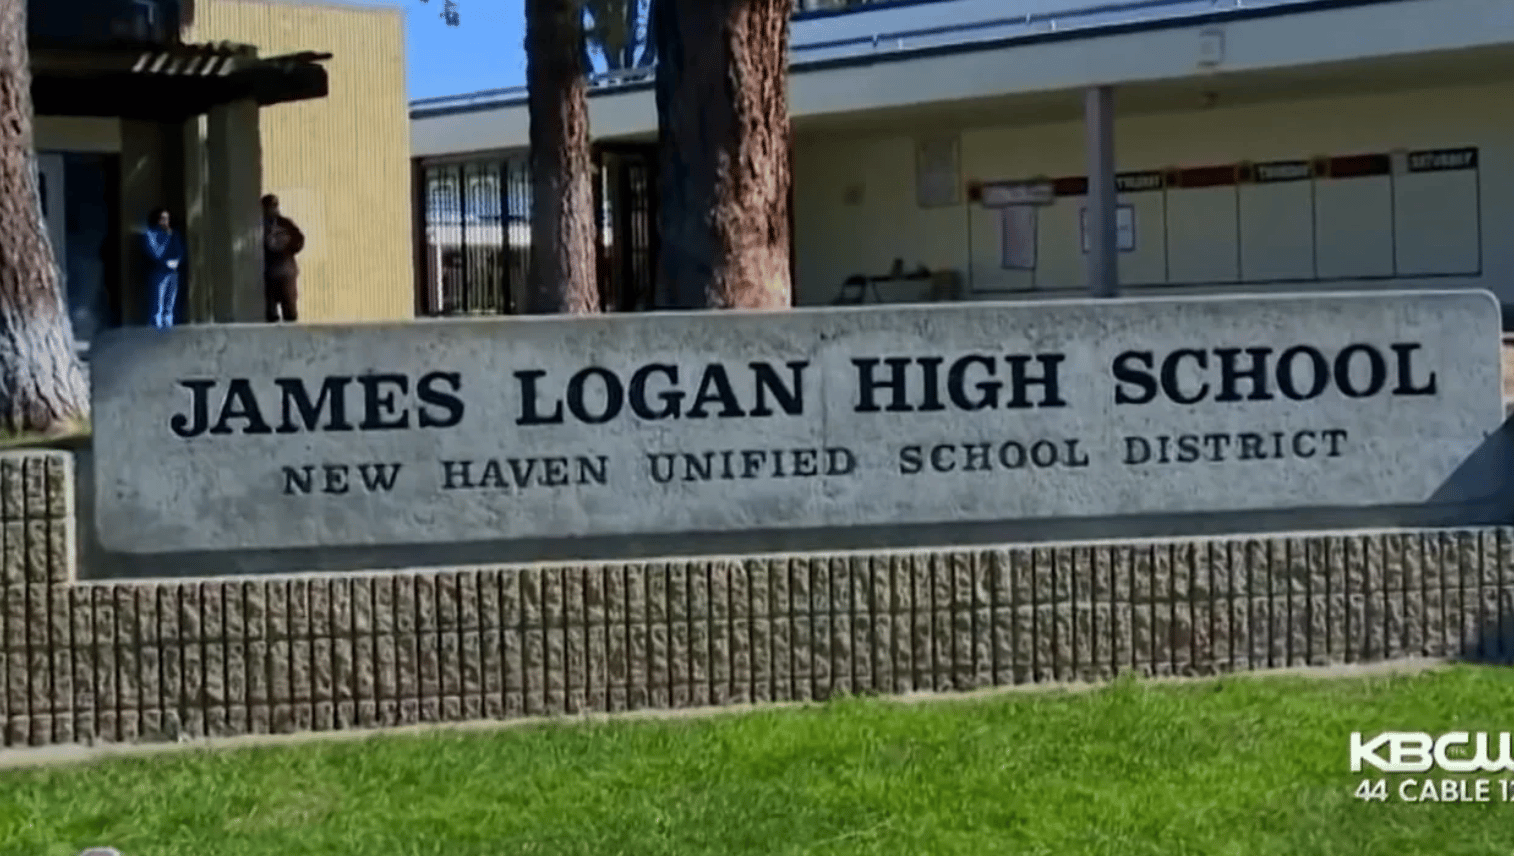 California teacher placed on leave after assigning Masturbation story to 10th graders